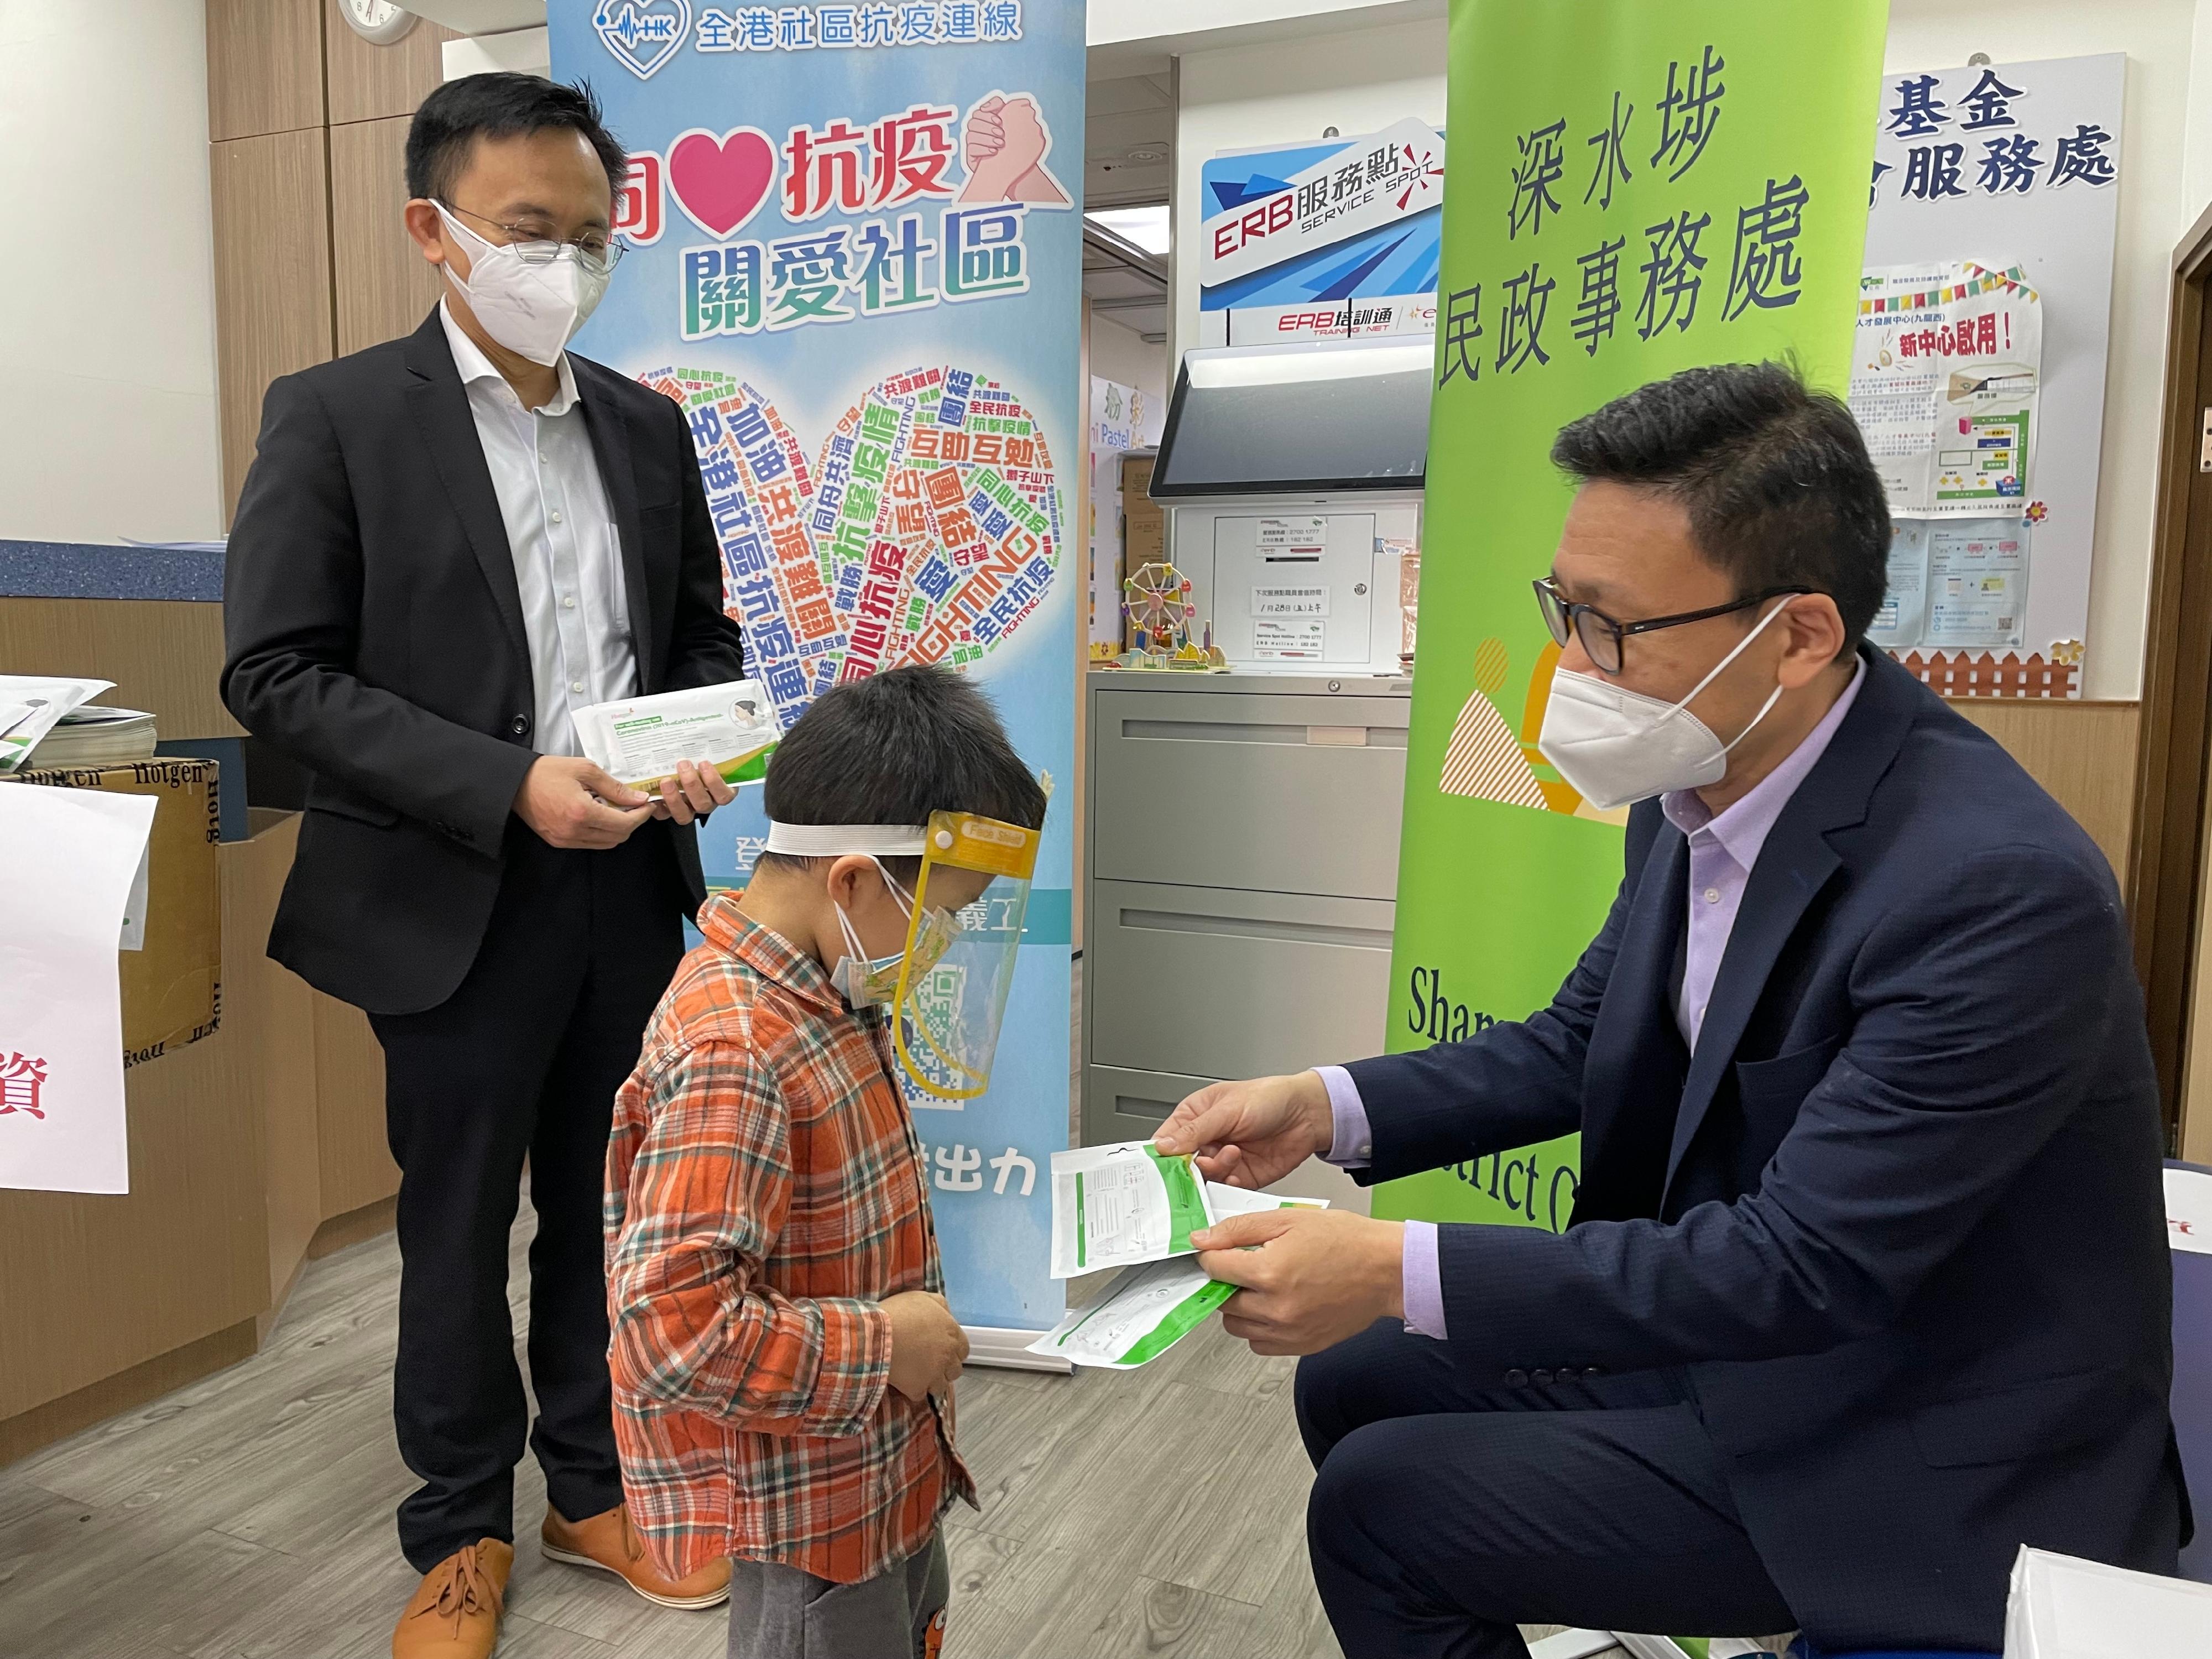 The Sham Shui Po District Office distributed rapid test kits supplied by the Central Government in the district through district organisations on March 3. Rapid test kits and other supplies were particularly distributed to grassroot families such as new arrivals and households living in subdivided flats. Photo shows the District Officer (Sham Shui Po), Mr Paul Wong (first right), distributing rapid test kits to a child from a household living in a subdivided flat. 

